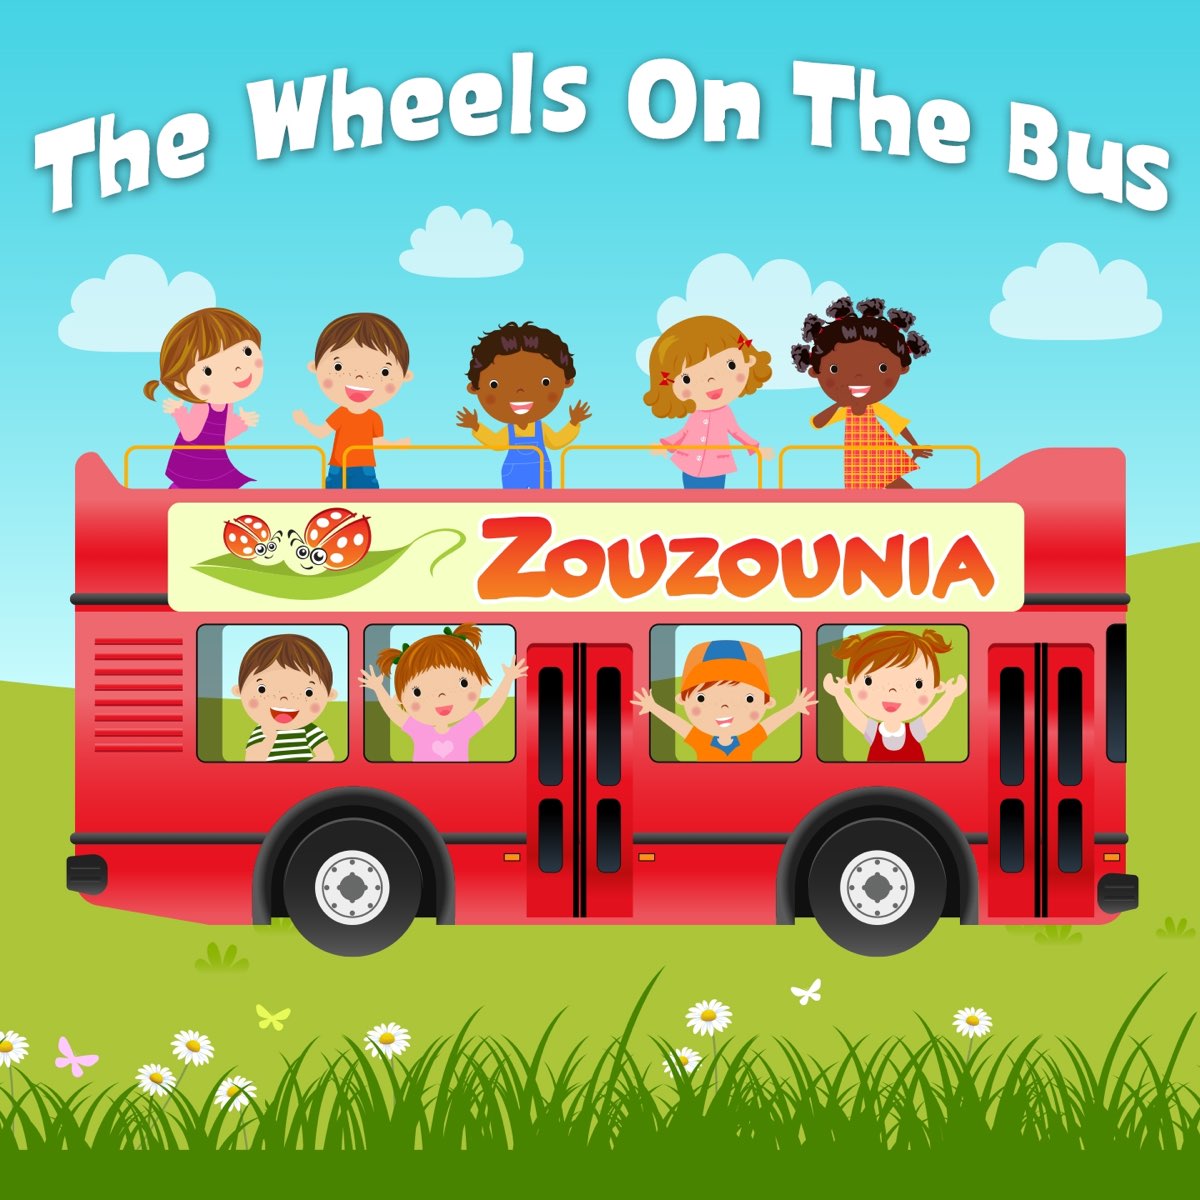 Busing песни. The Wheels on the Bus. The Wheels on the Bus Song. Bus. The Wheels on the Bus 3d Nursery Rhymes children Songs картинки.